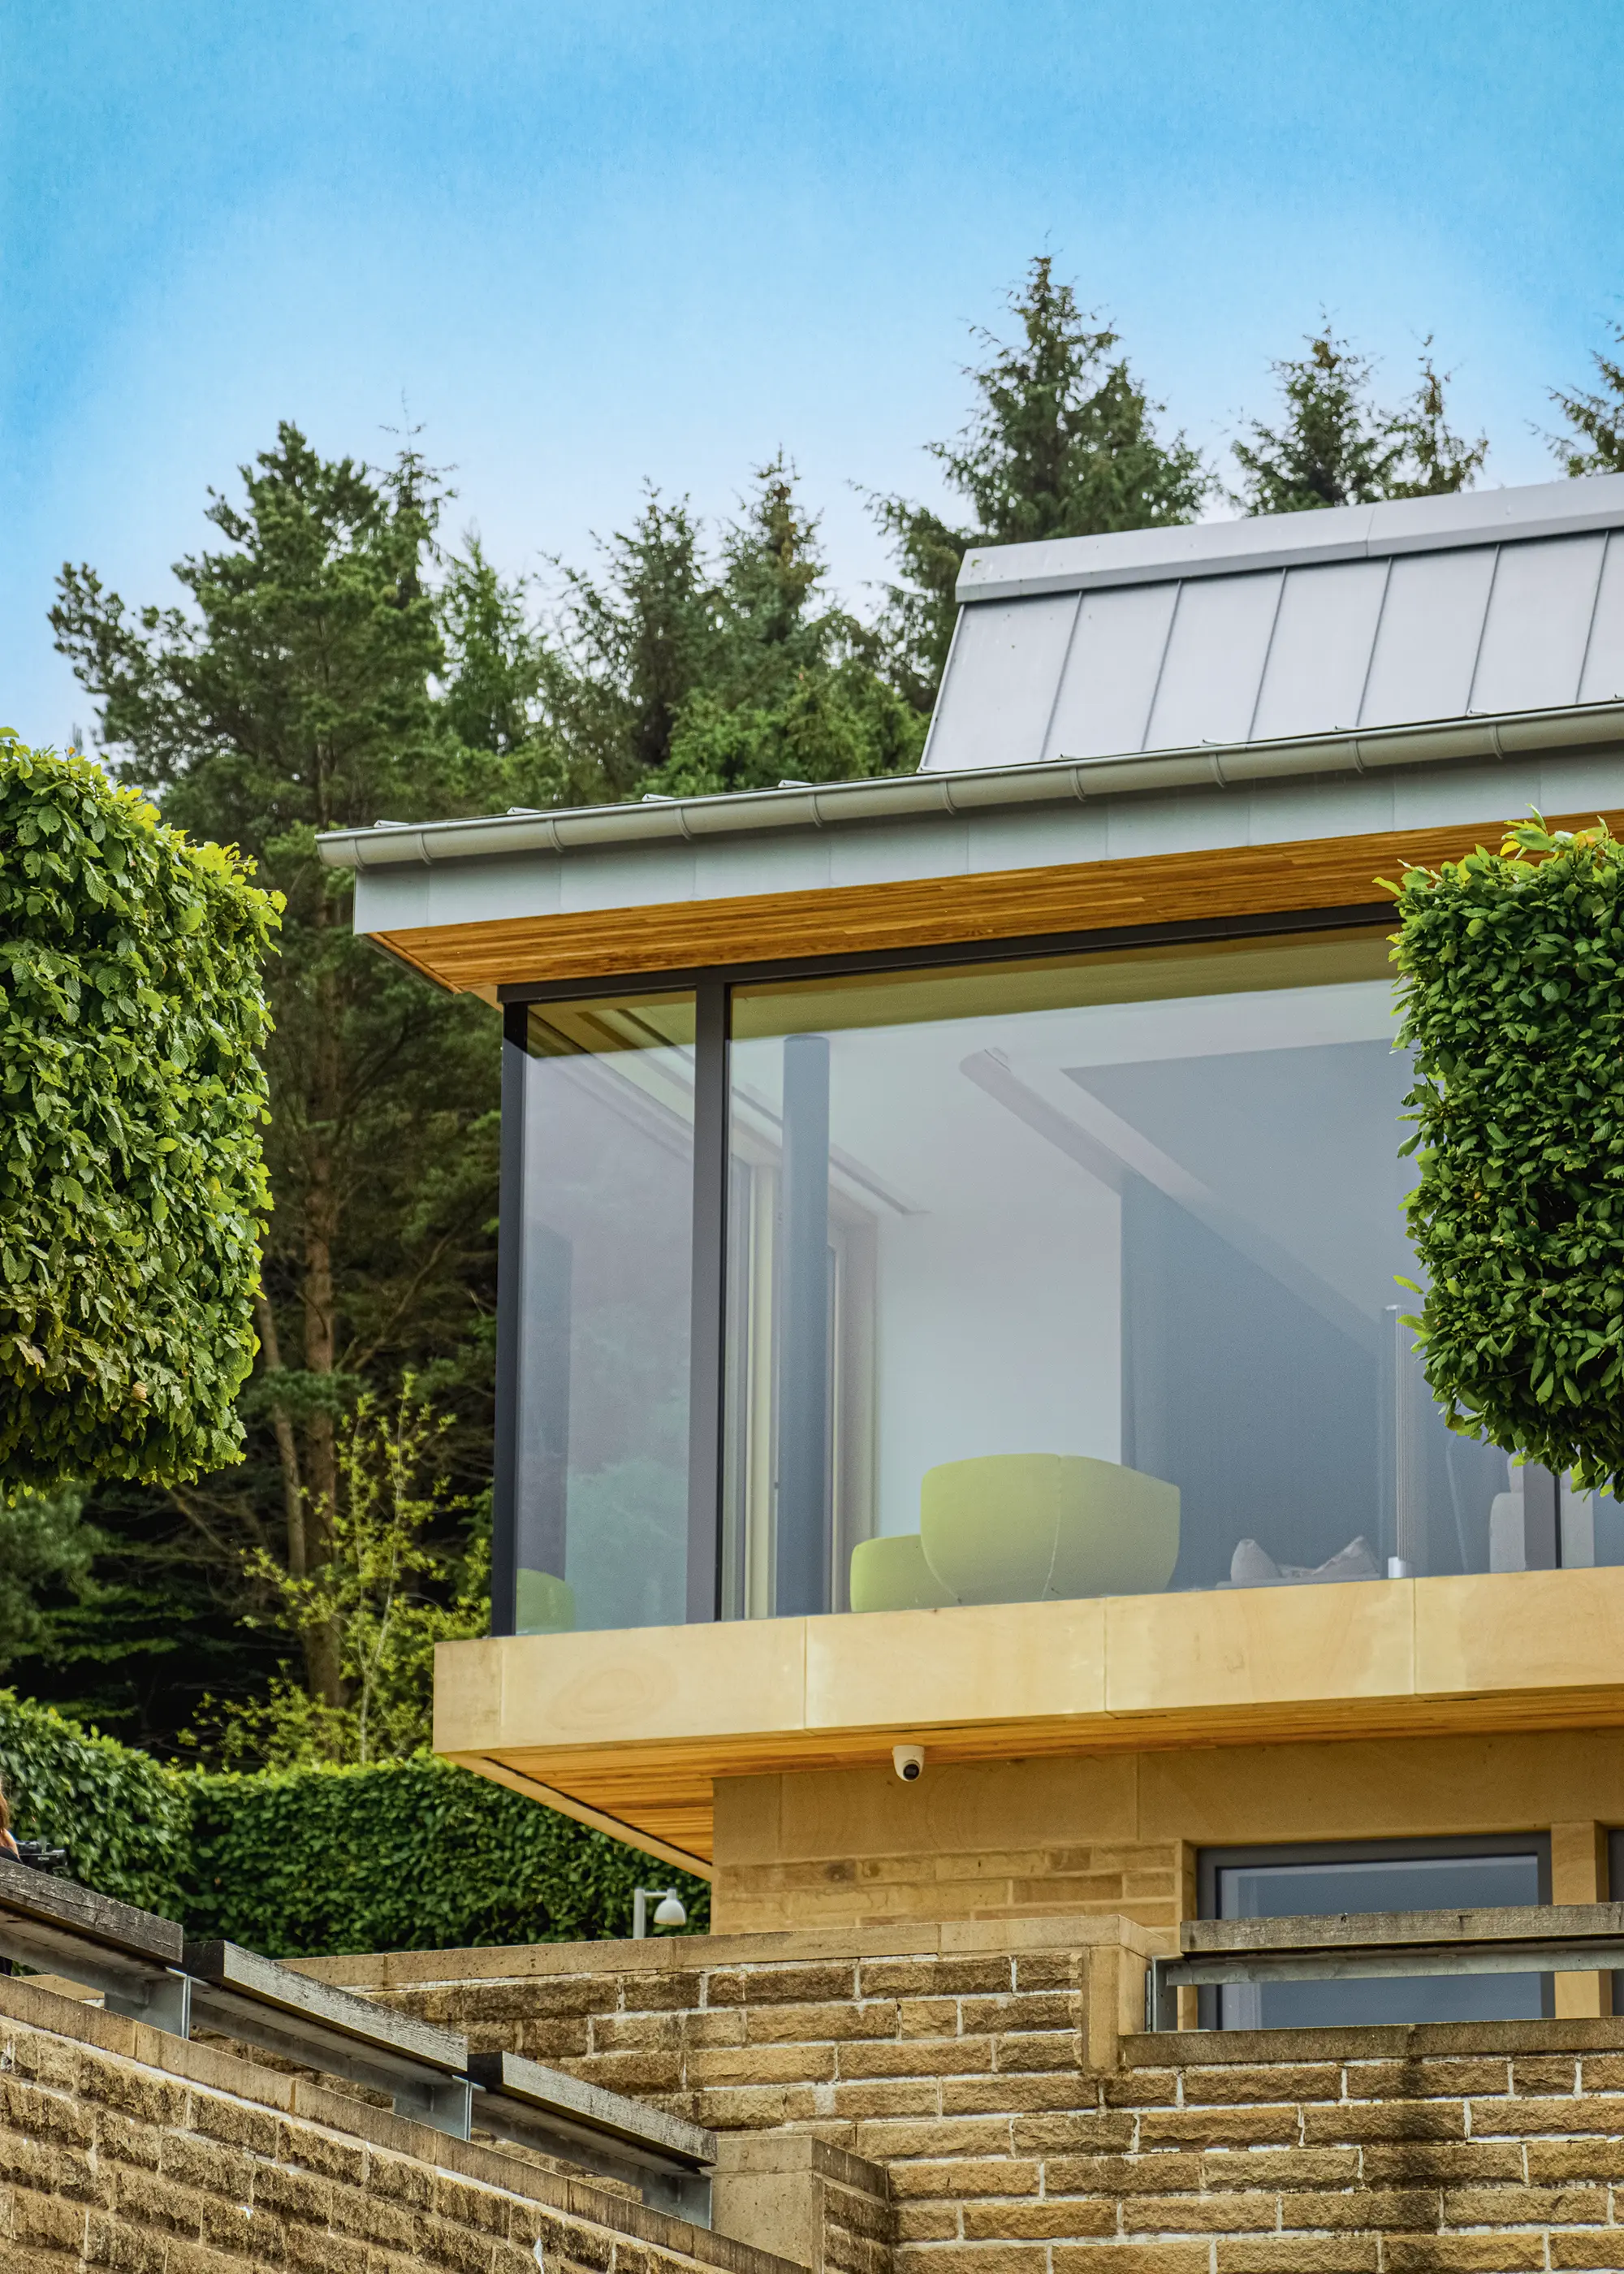 How to Specify Windows & Doors for Your Passivhaus Self Build